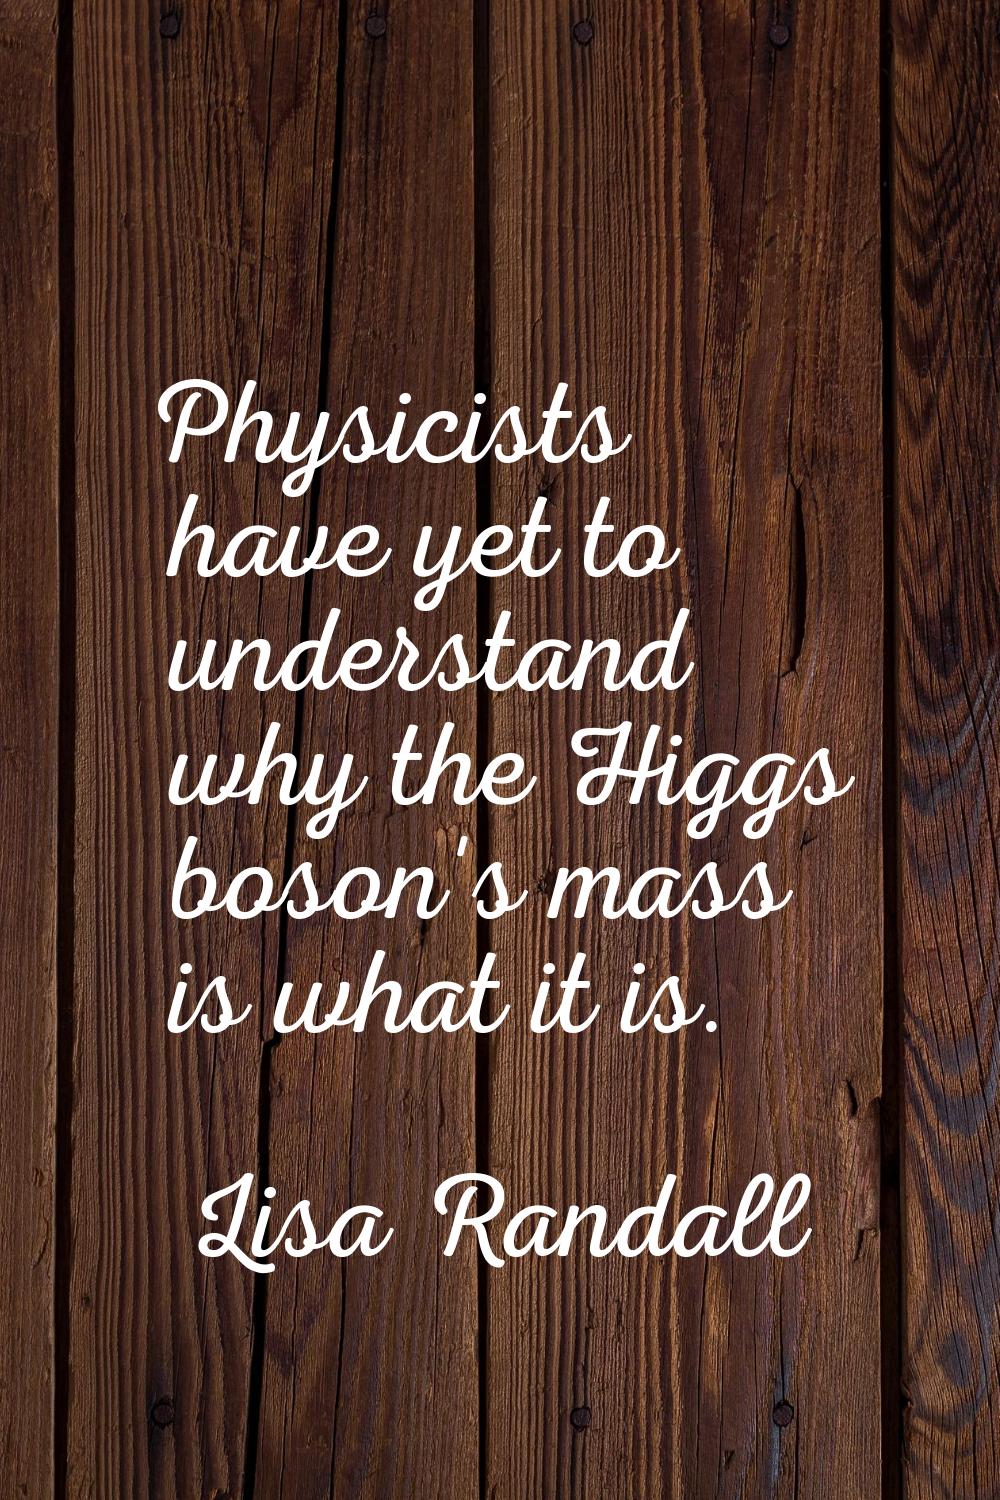 Physicists have yet to understand why the Higgs boson's mass is what it is.